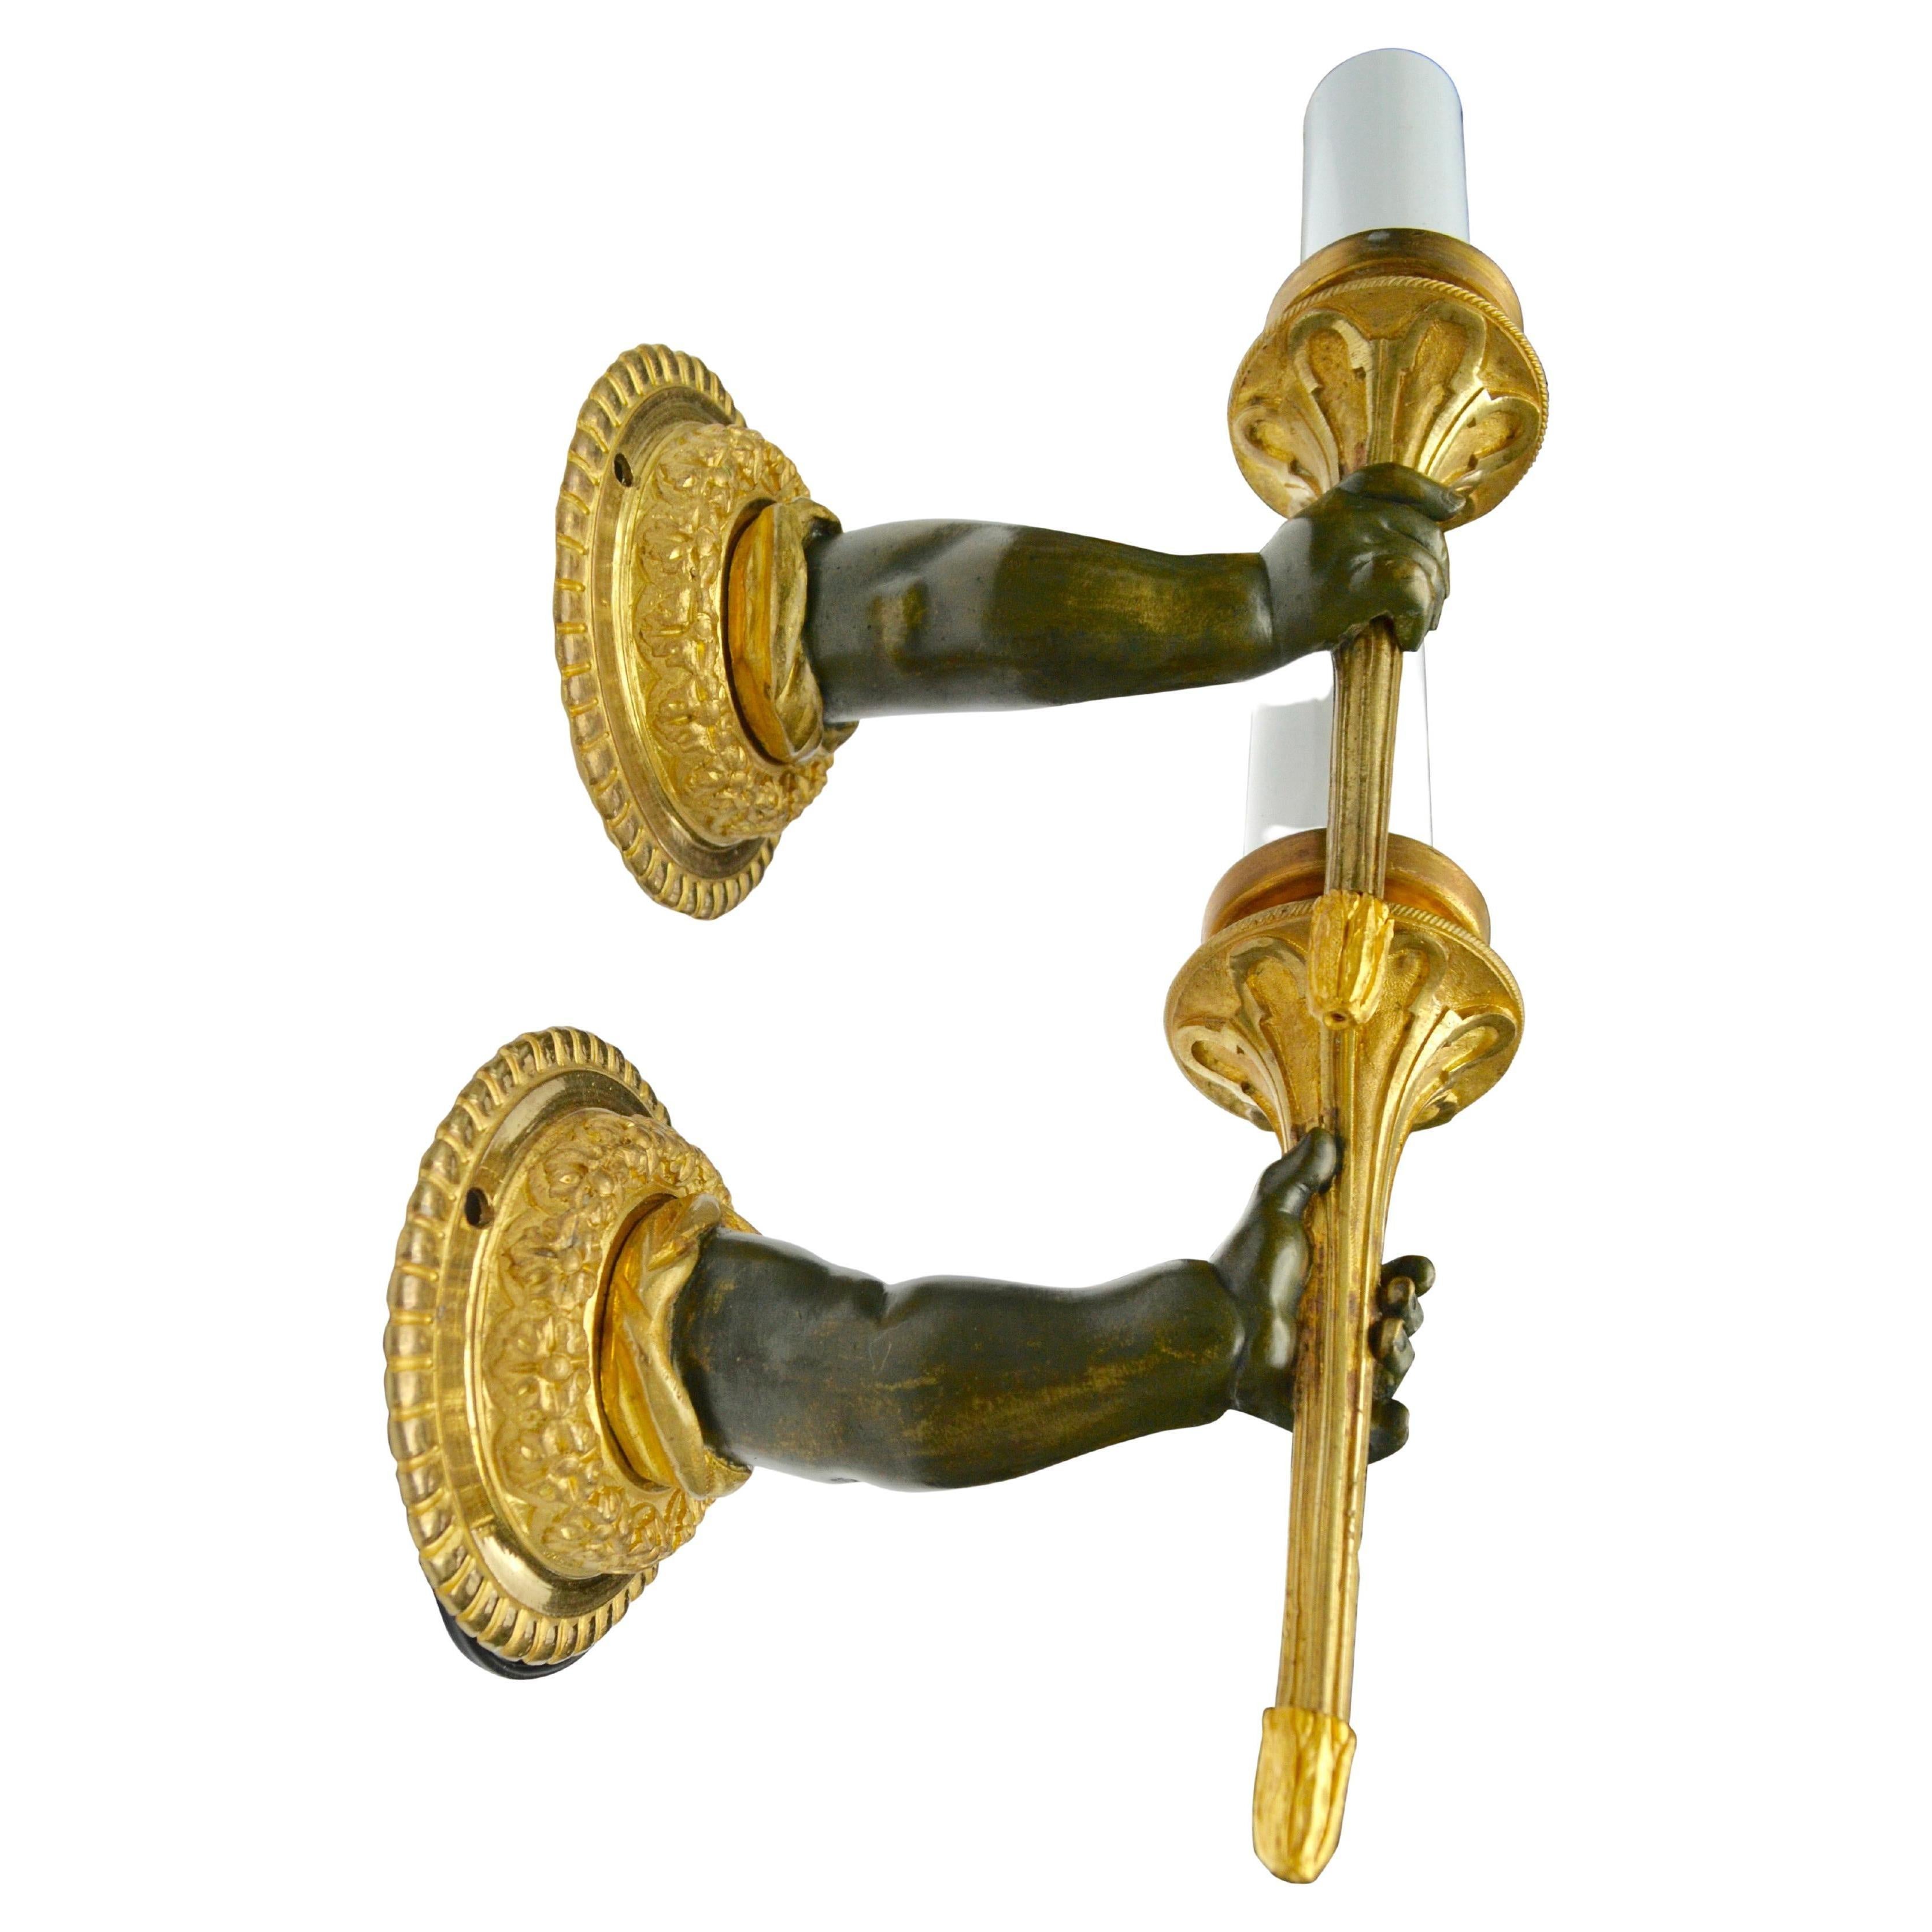 Pair of French Empire Style Patinated Bronze Arm and Hand Sconces